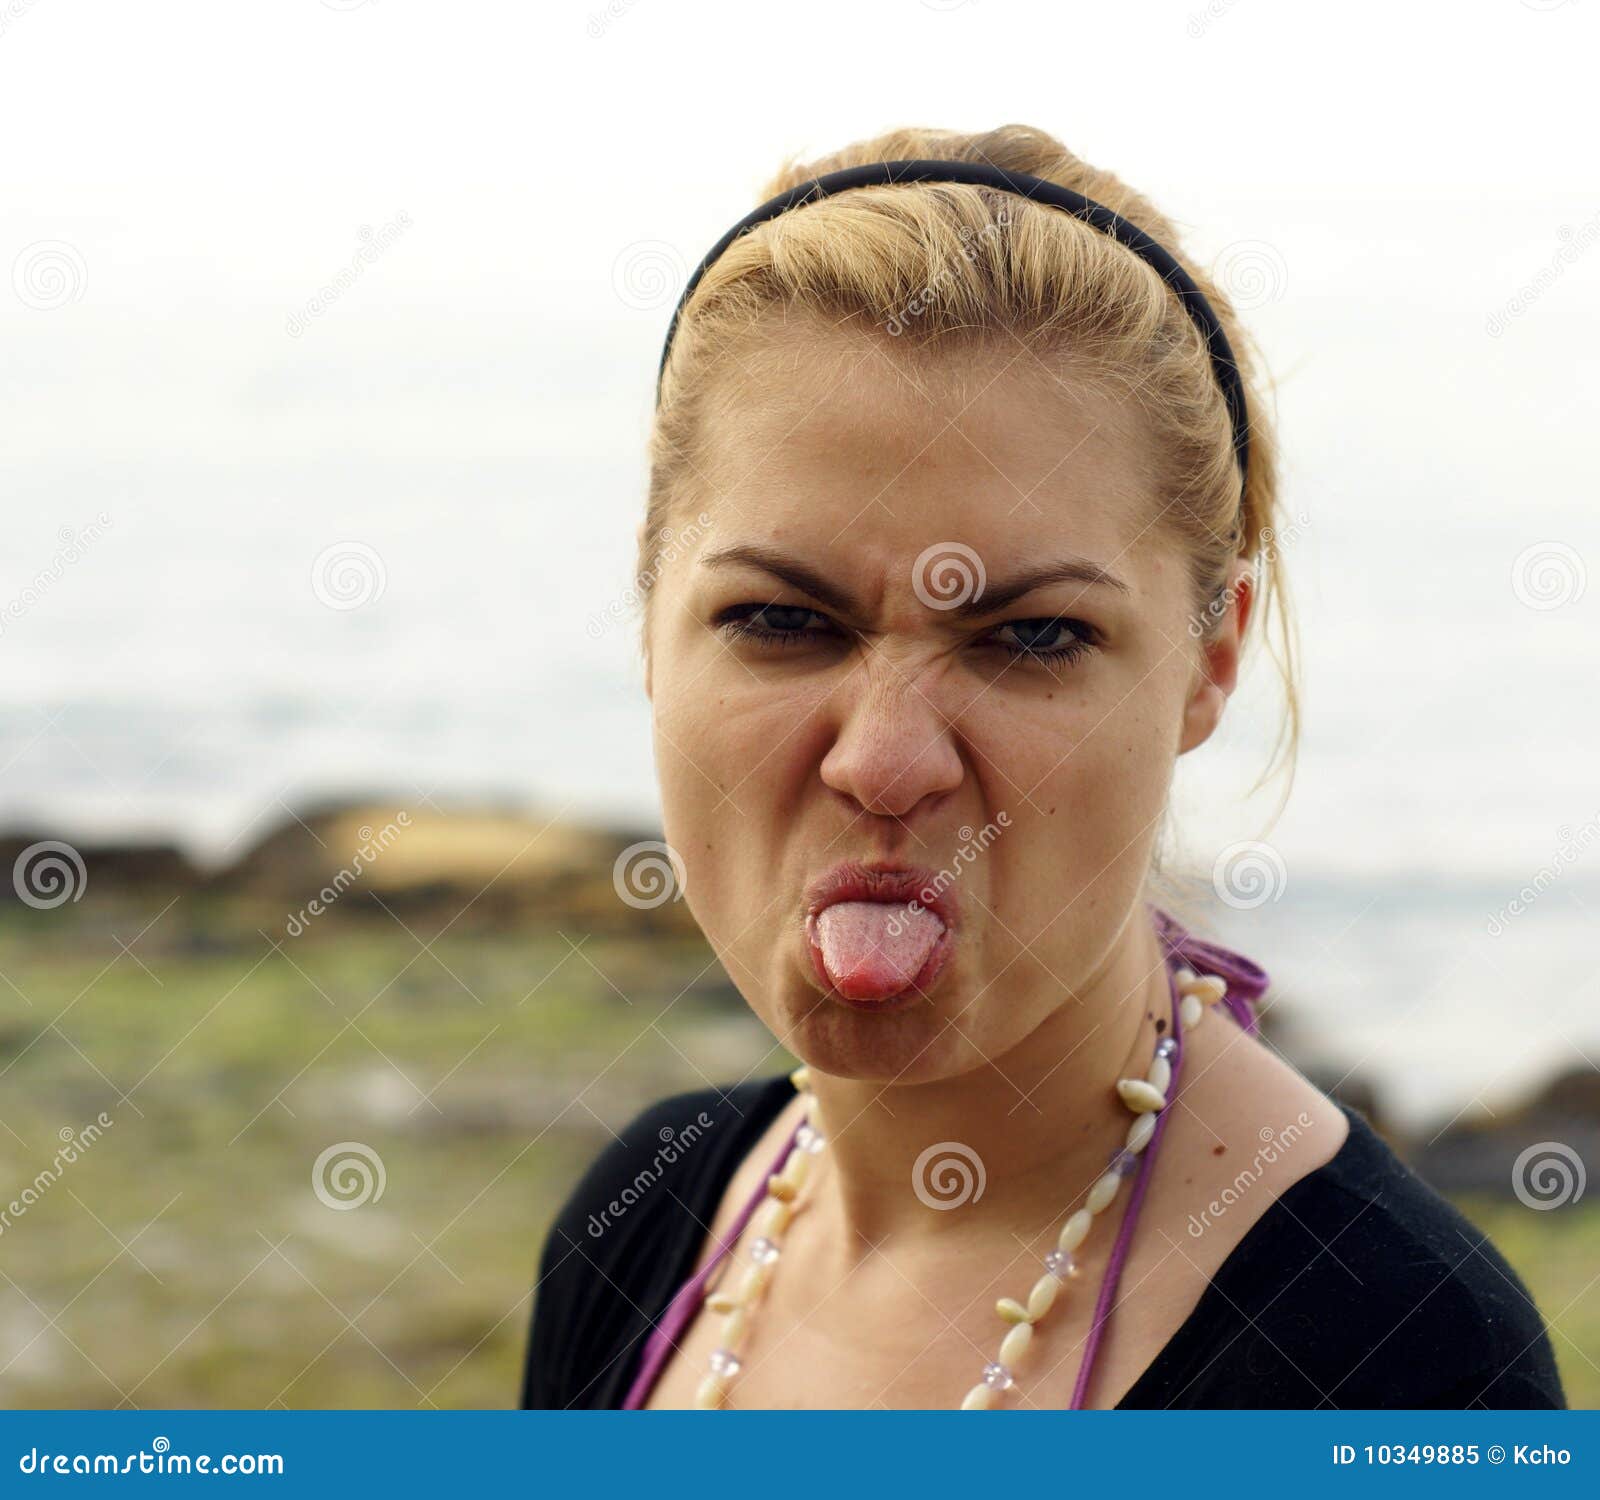 Tongue out sticking woman Beckwith